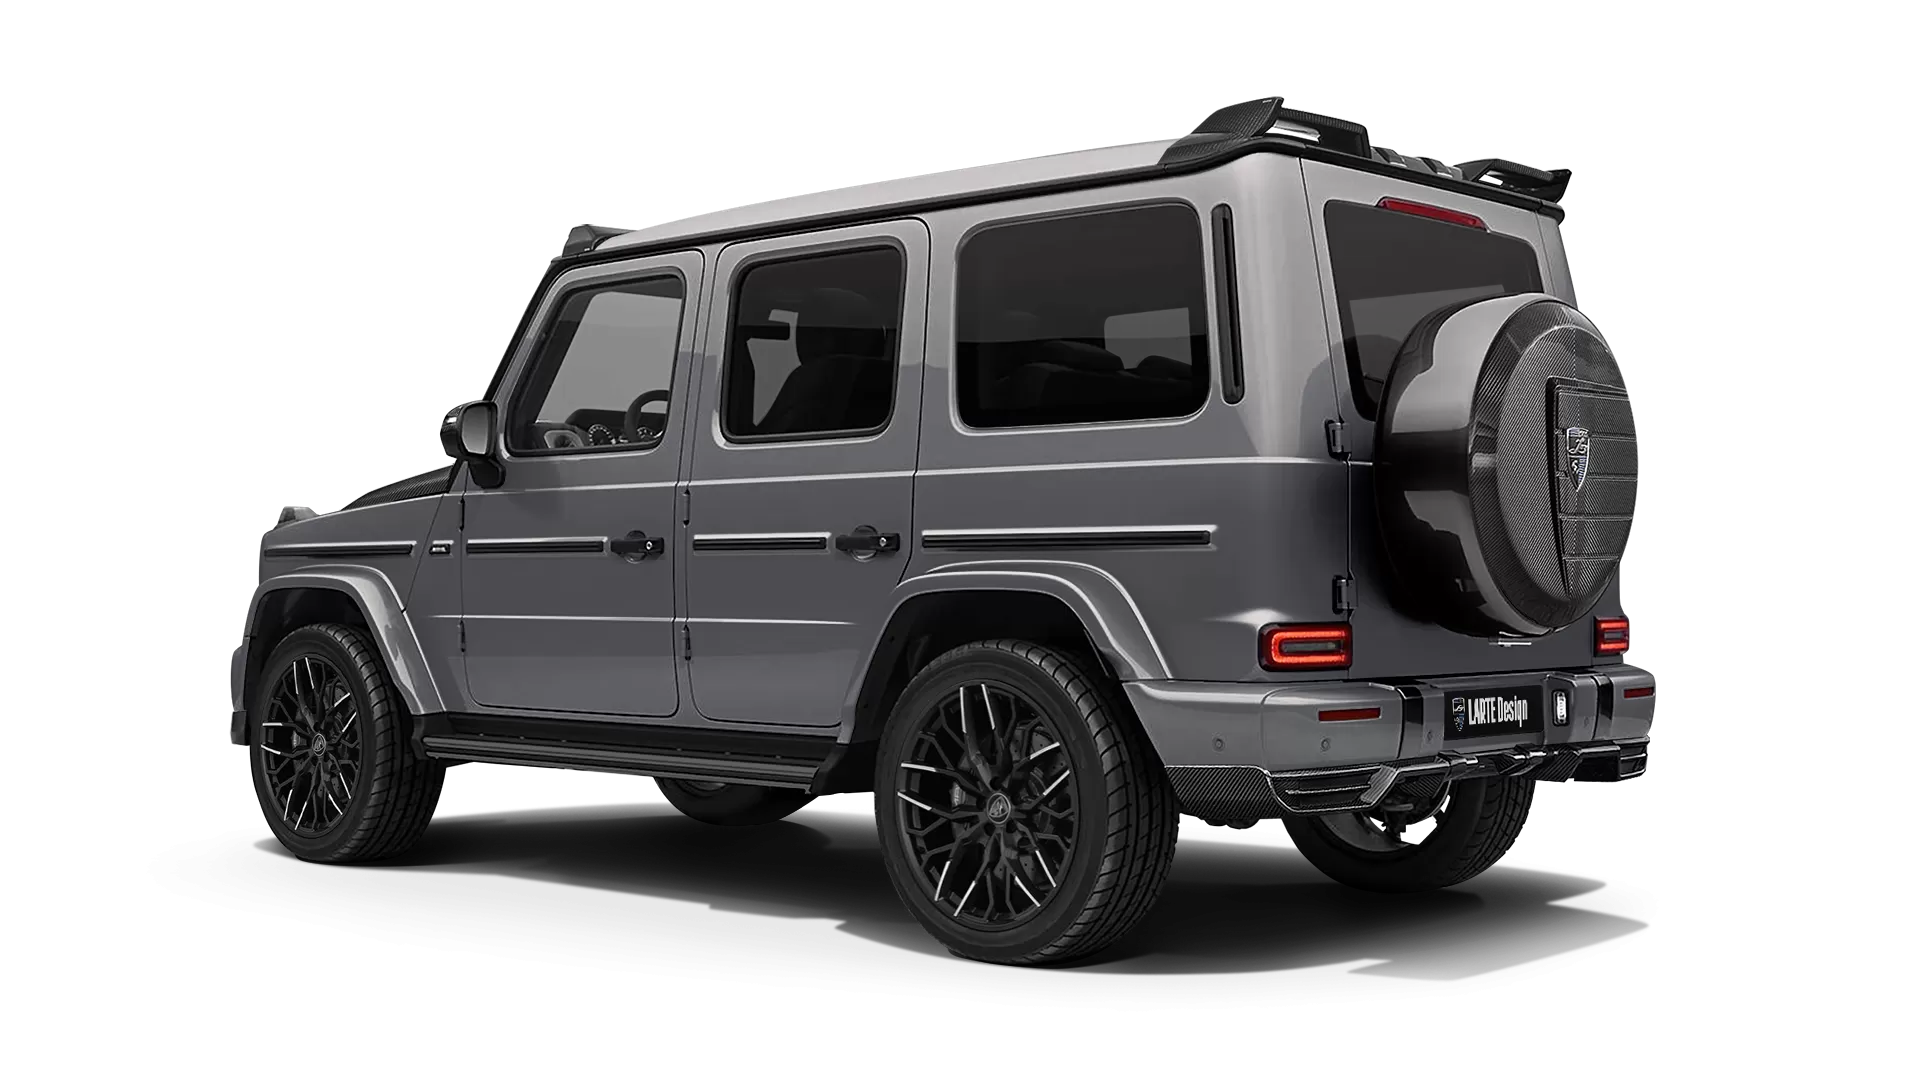 Mercedes G class W463 with carbon body kit: back view shown in Mojave Silver